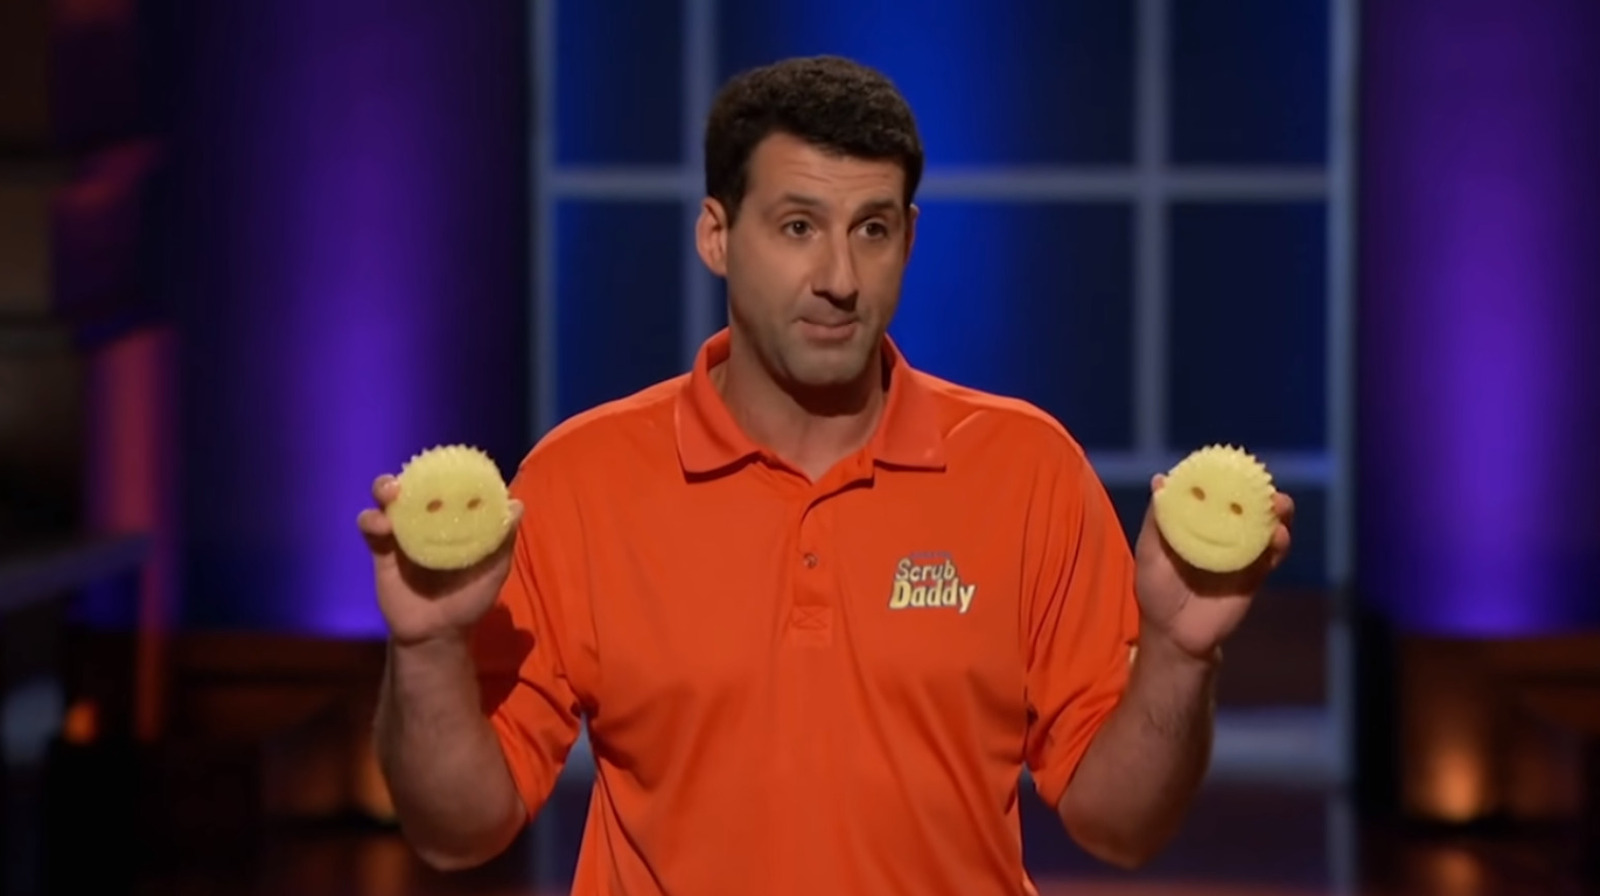 Whatever Happened To Scrub Daddy After Shark Tank?